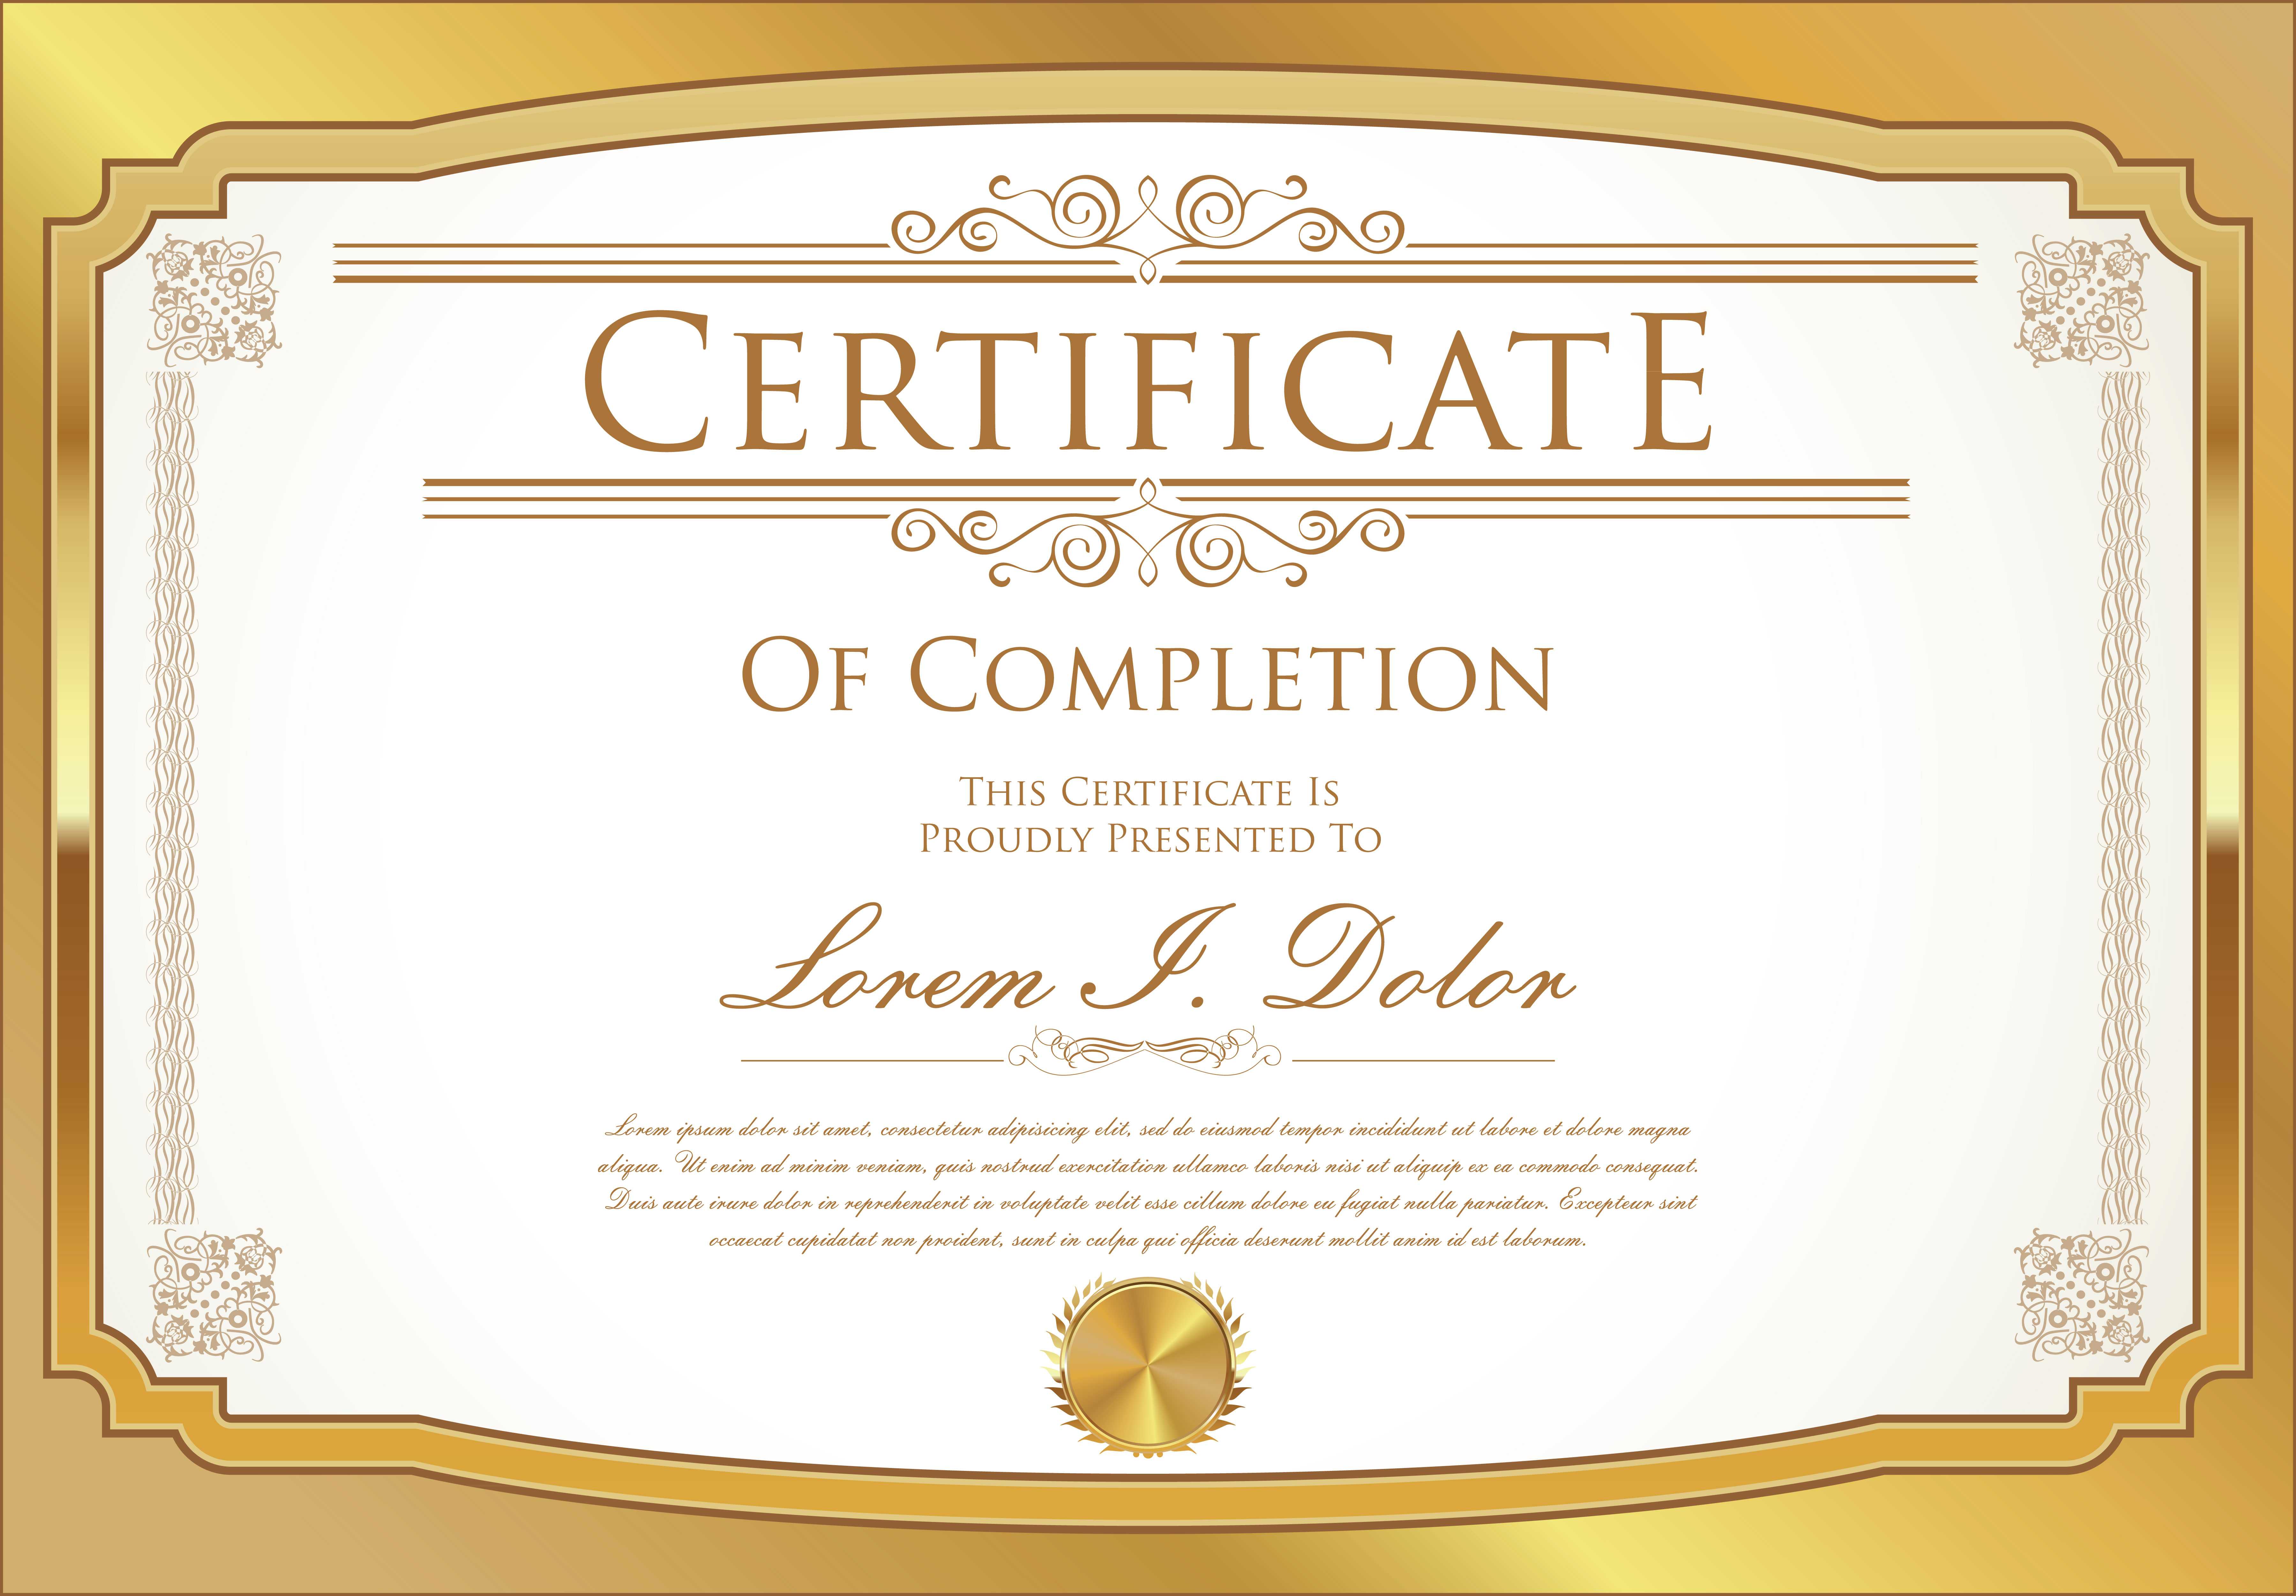 Certificate Template – Download Free Vectors, Clipart Within Commemorative Certificate Template